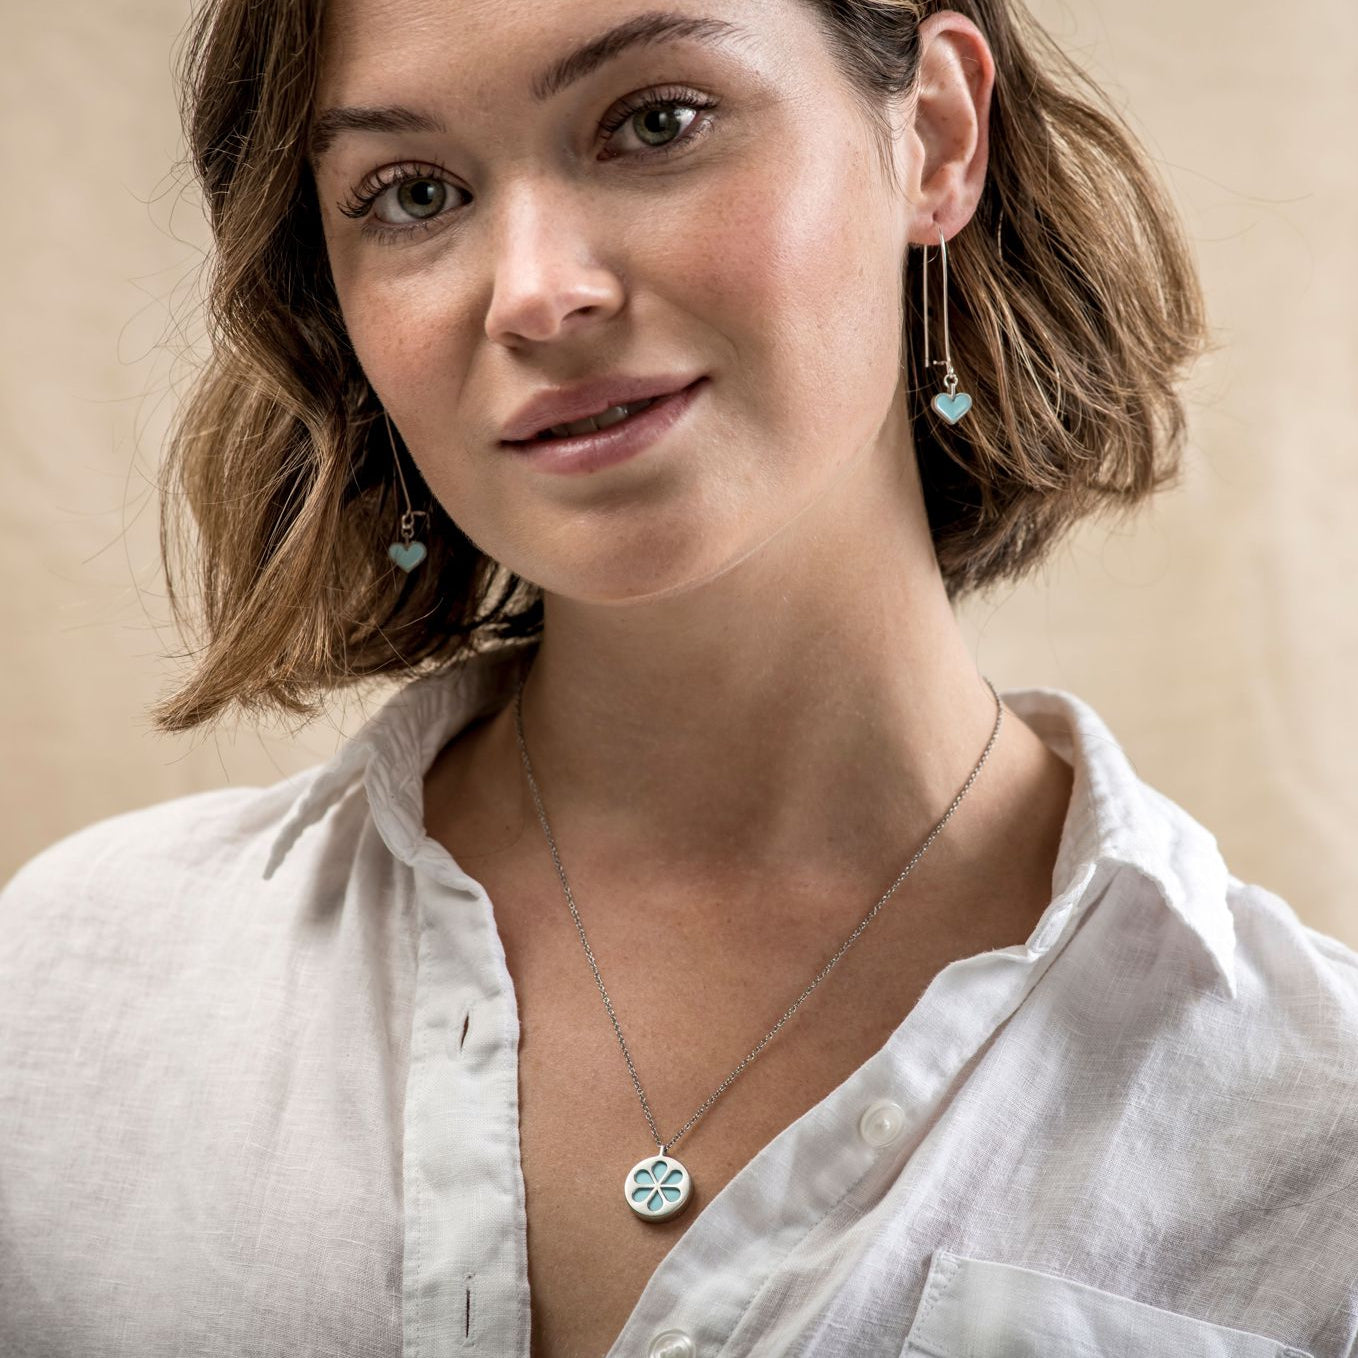 Fashion model wearing a simple, delicate, turquoise flower necklace.